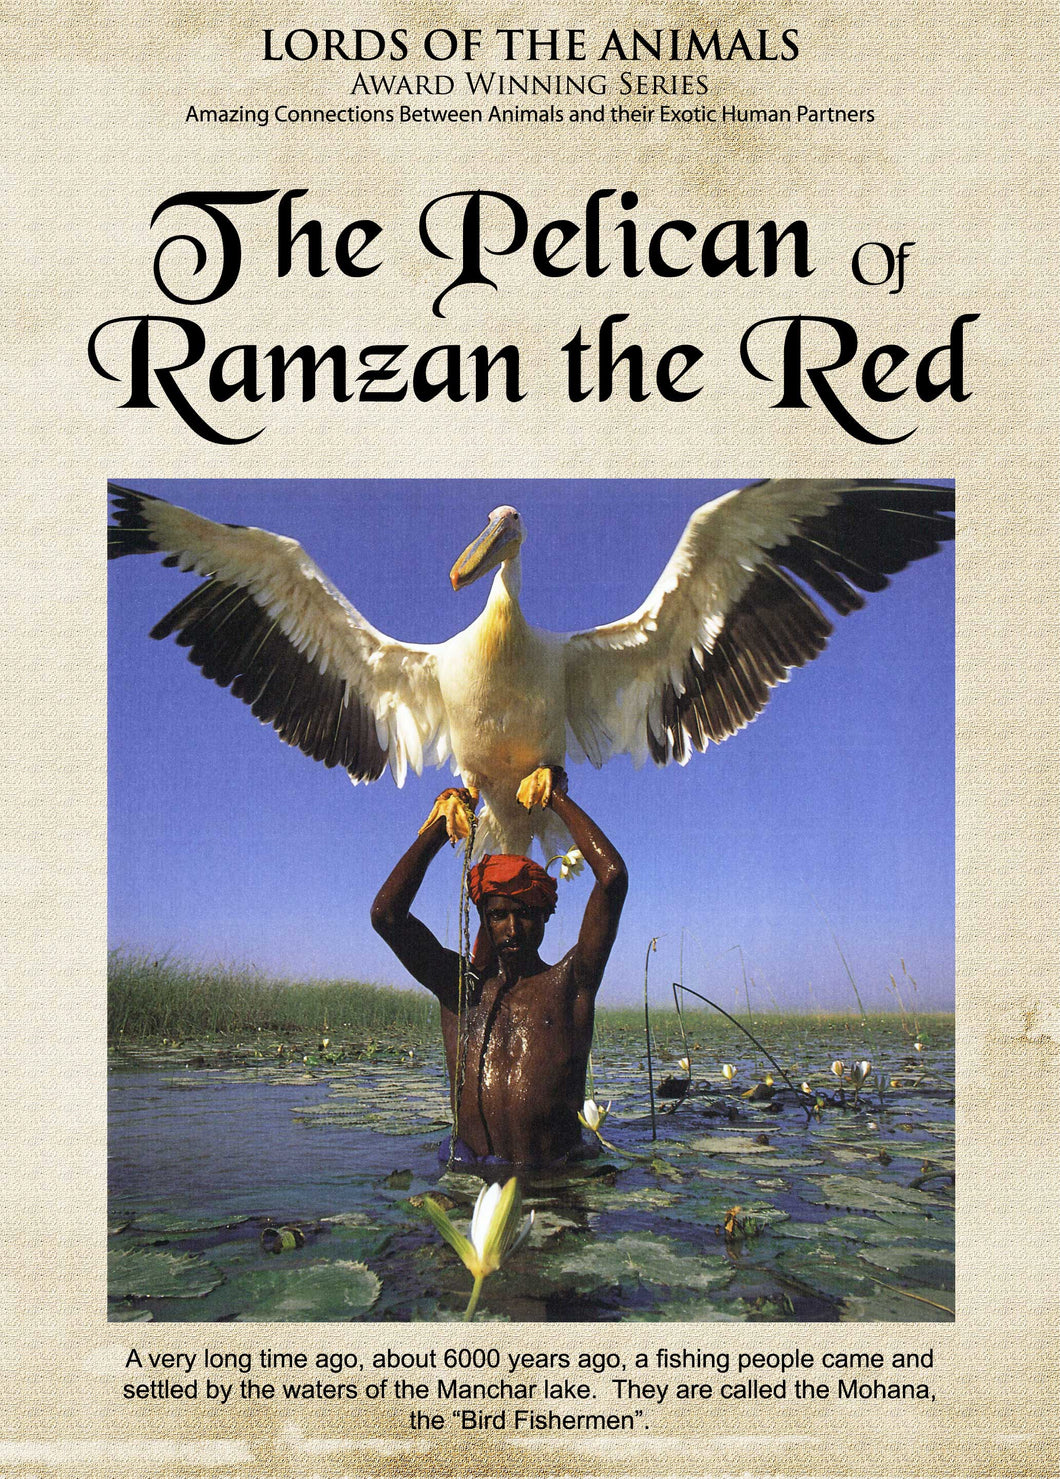 Lords of the Animals: Pelican of Razman the Red